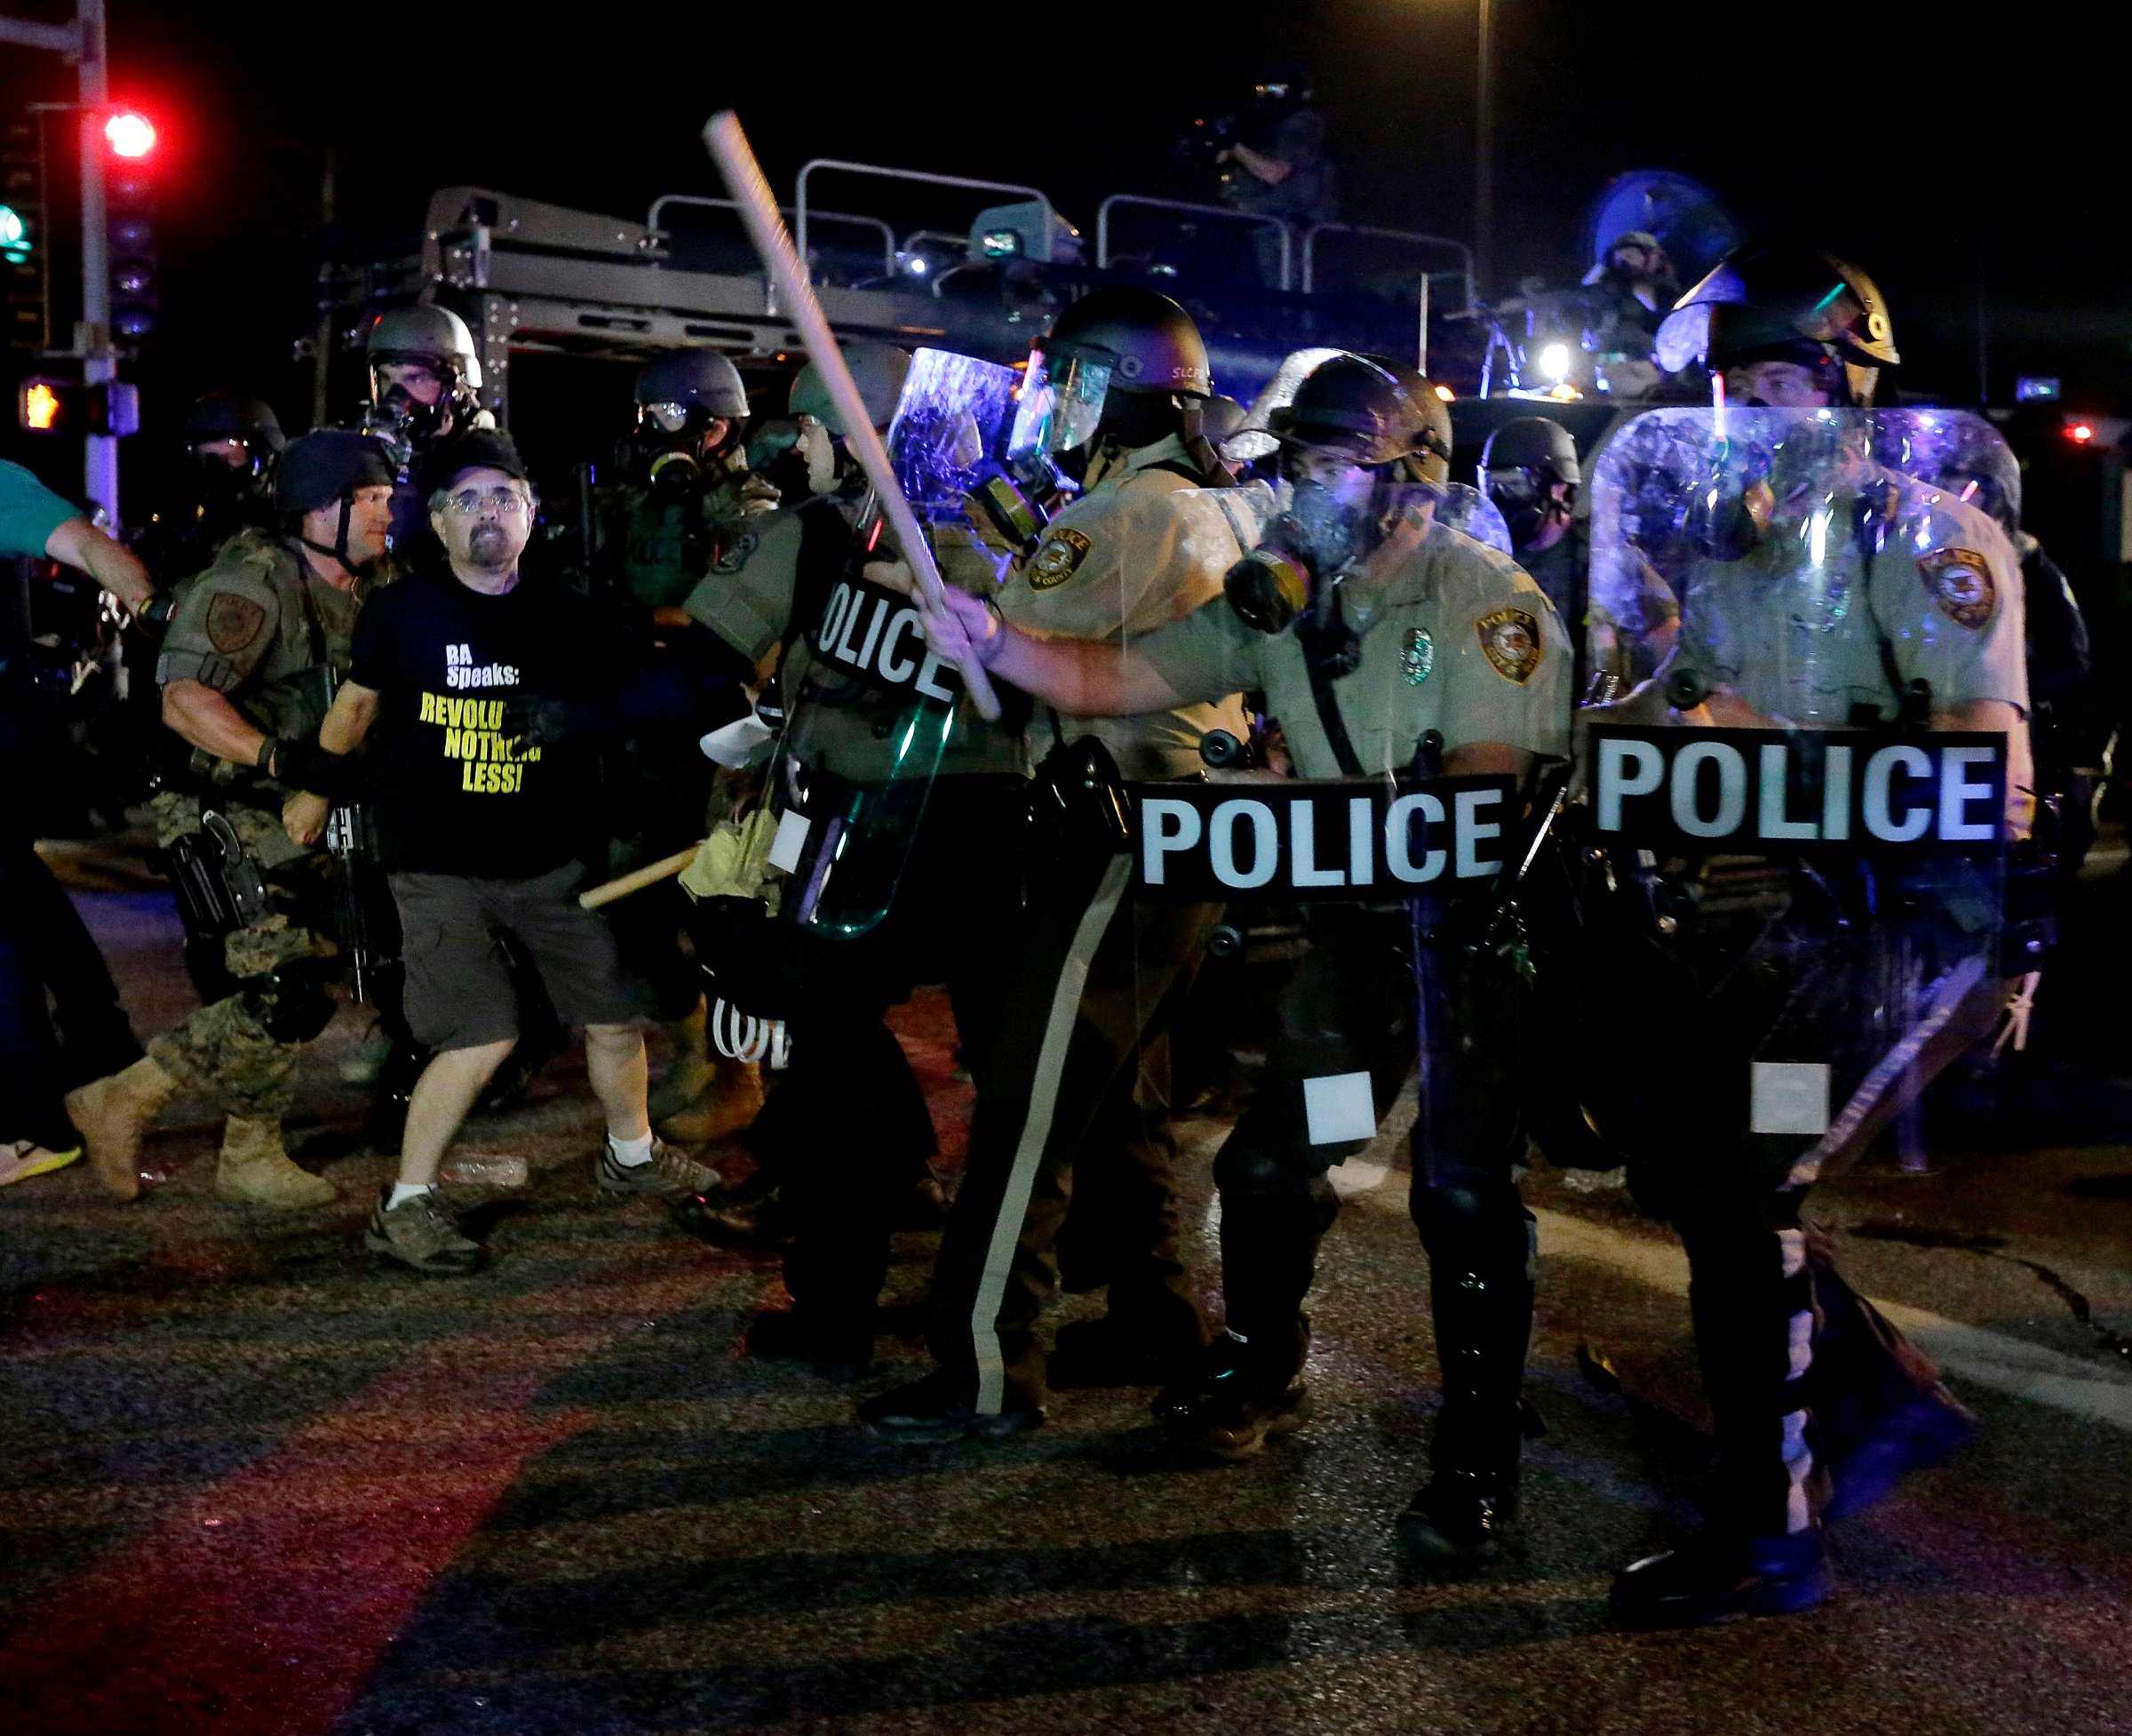 A man is detained after a standoff between protesters and police on Aug. 18, 2014 in Ferguson, Mo.